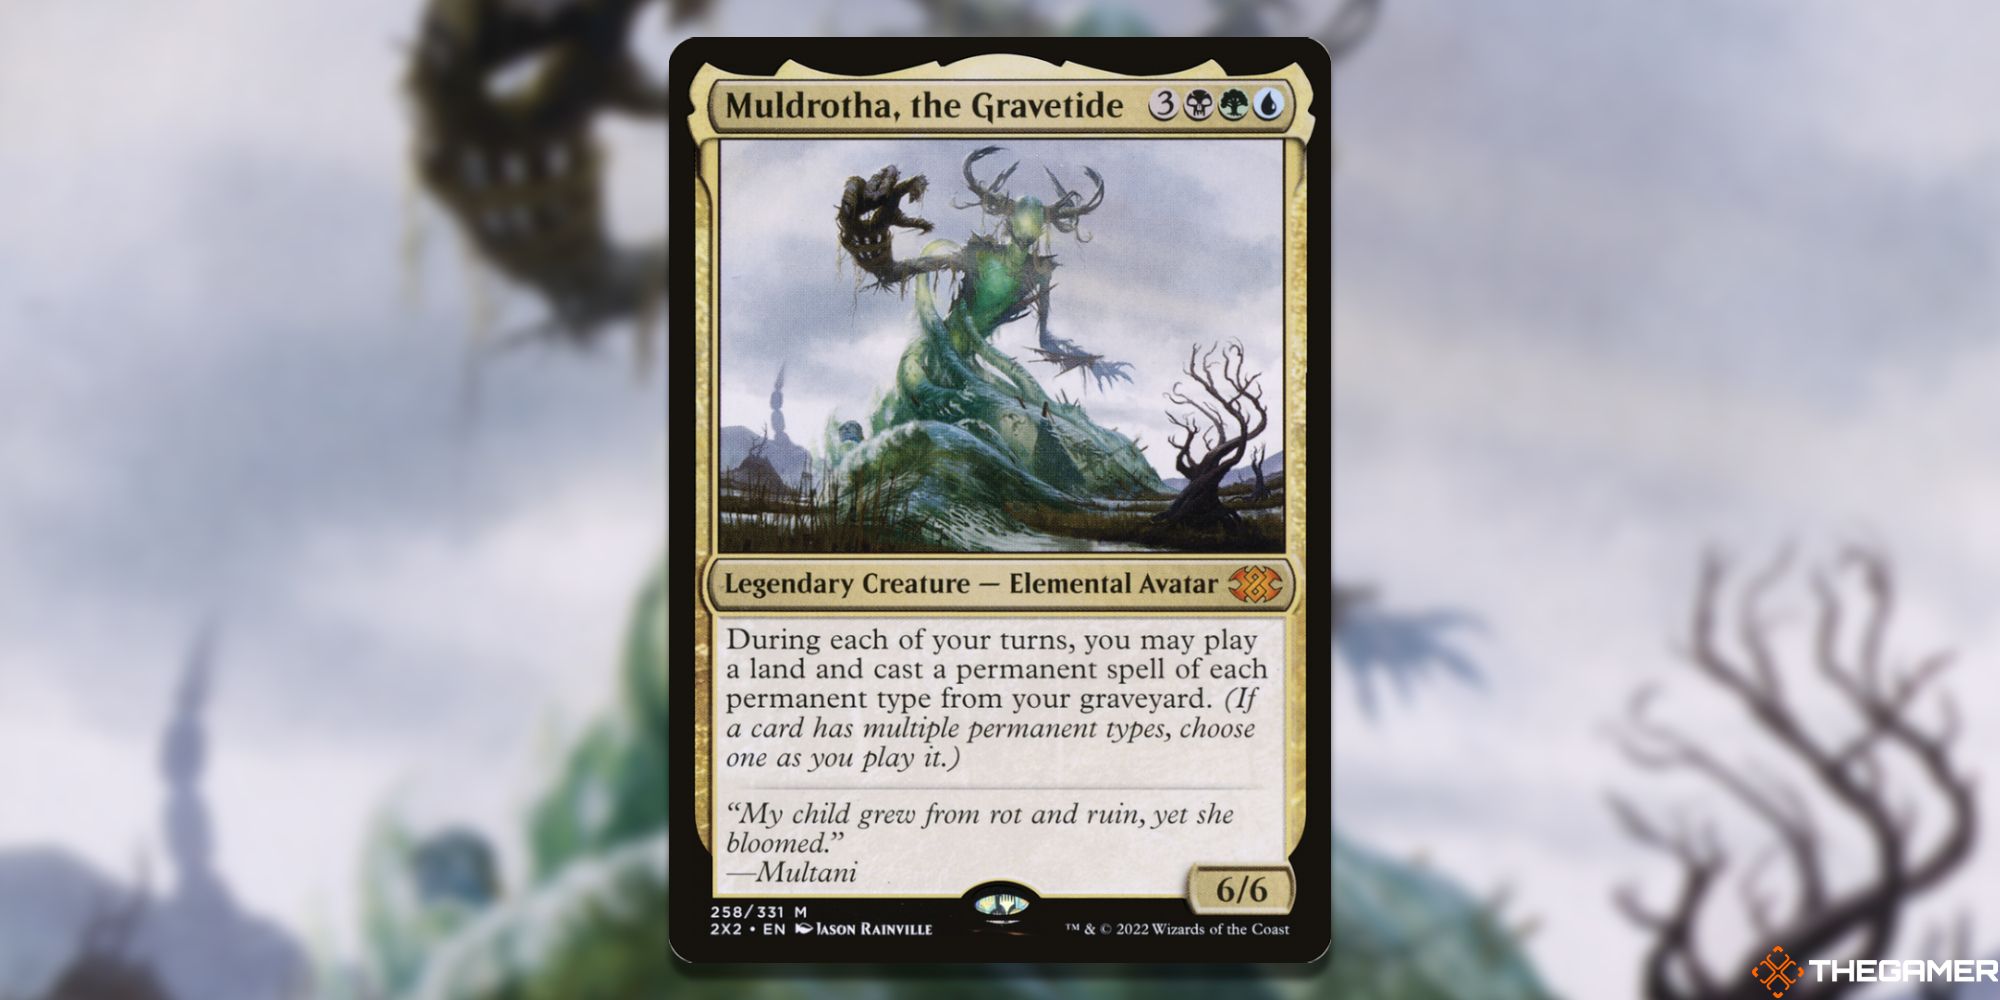 Image of the Muldrotha, the Gravetide card in Magic: The Gathering, with art by Jason Rainville